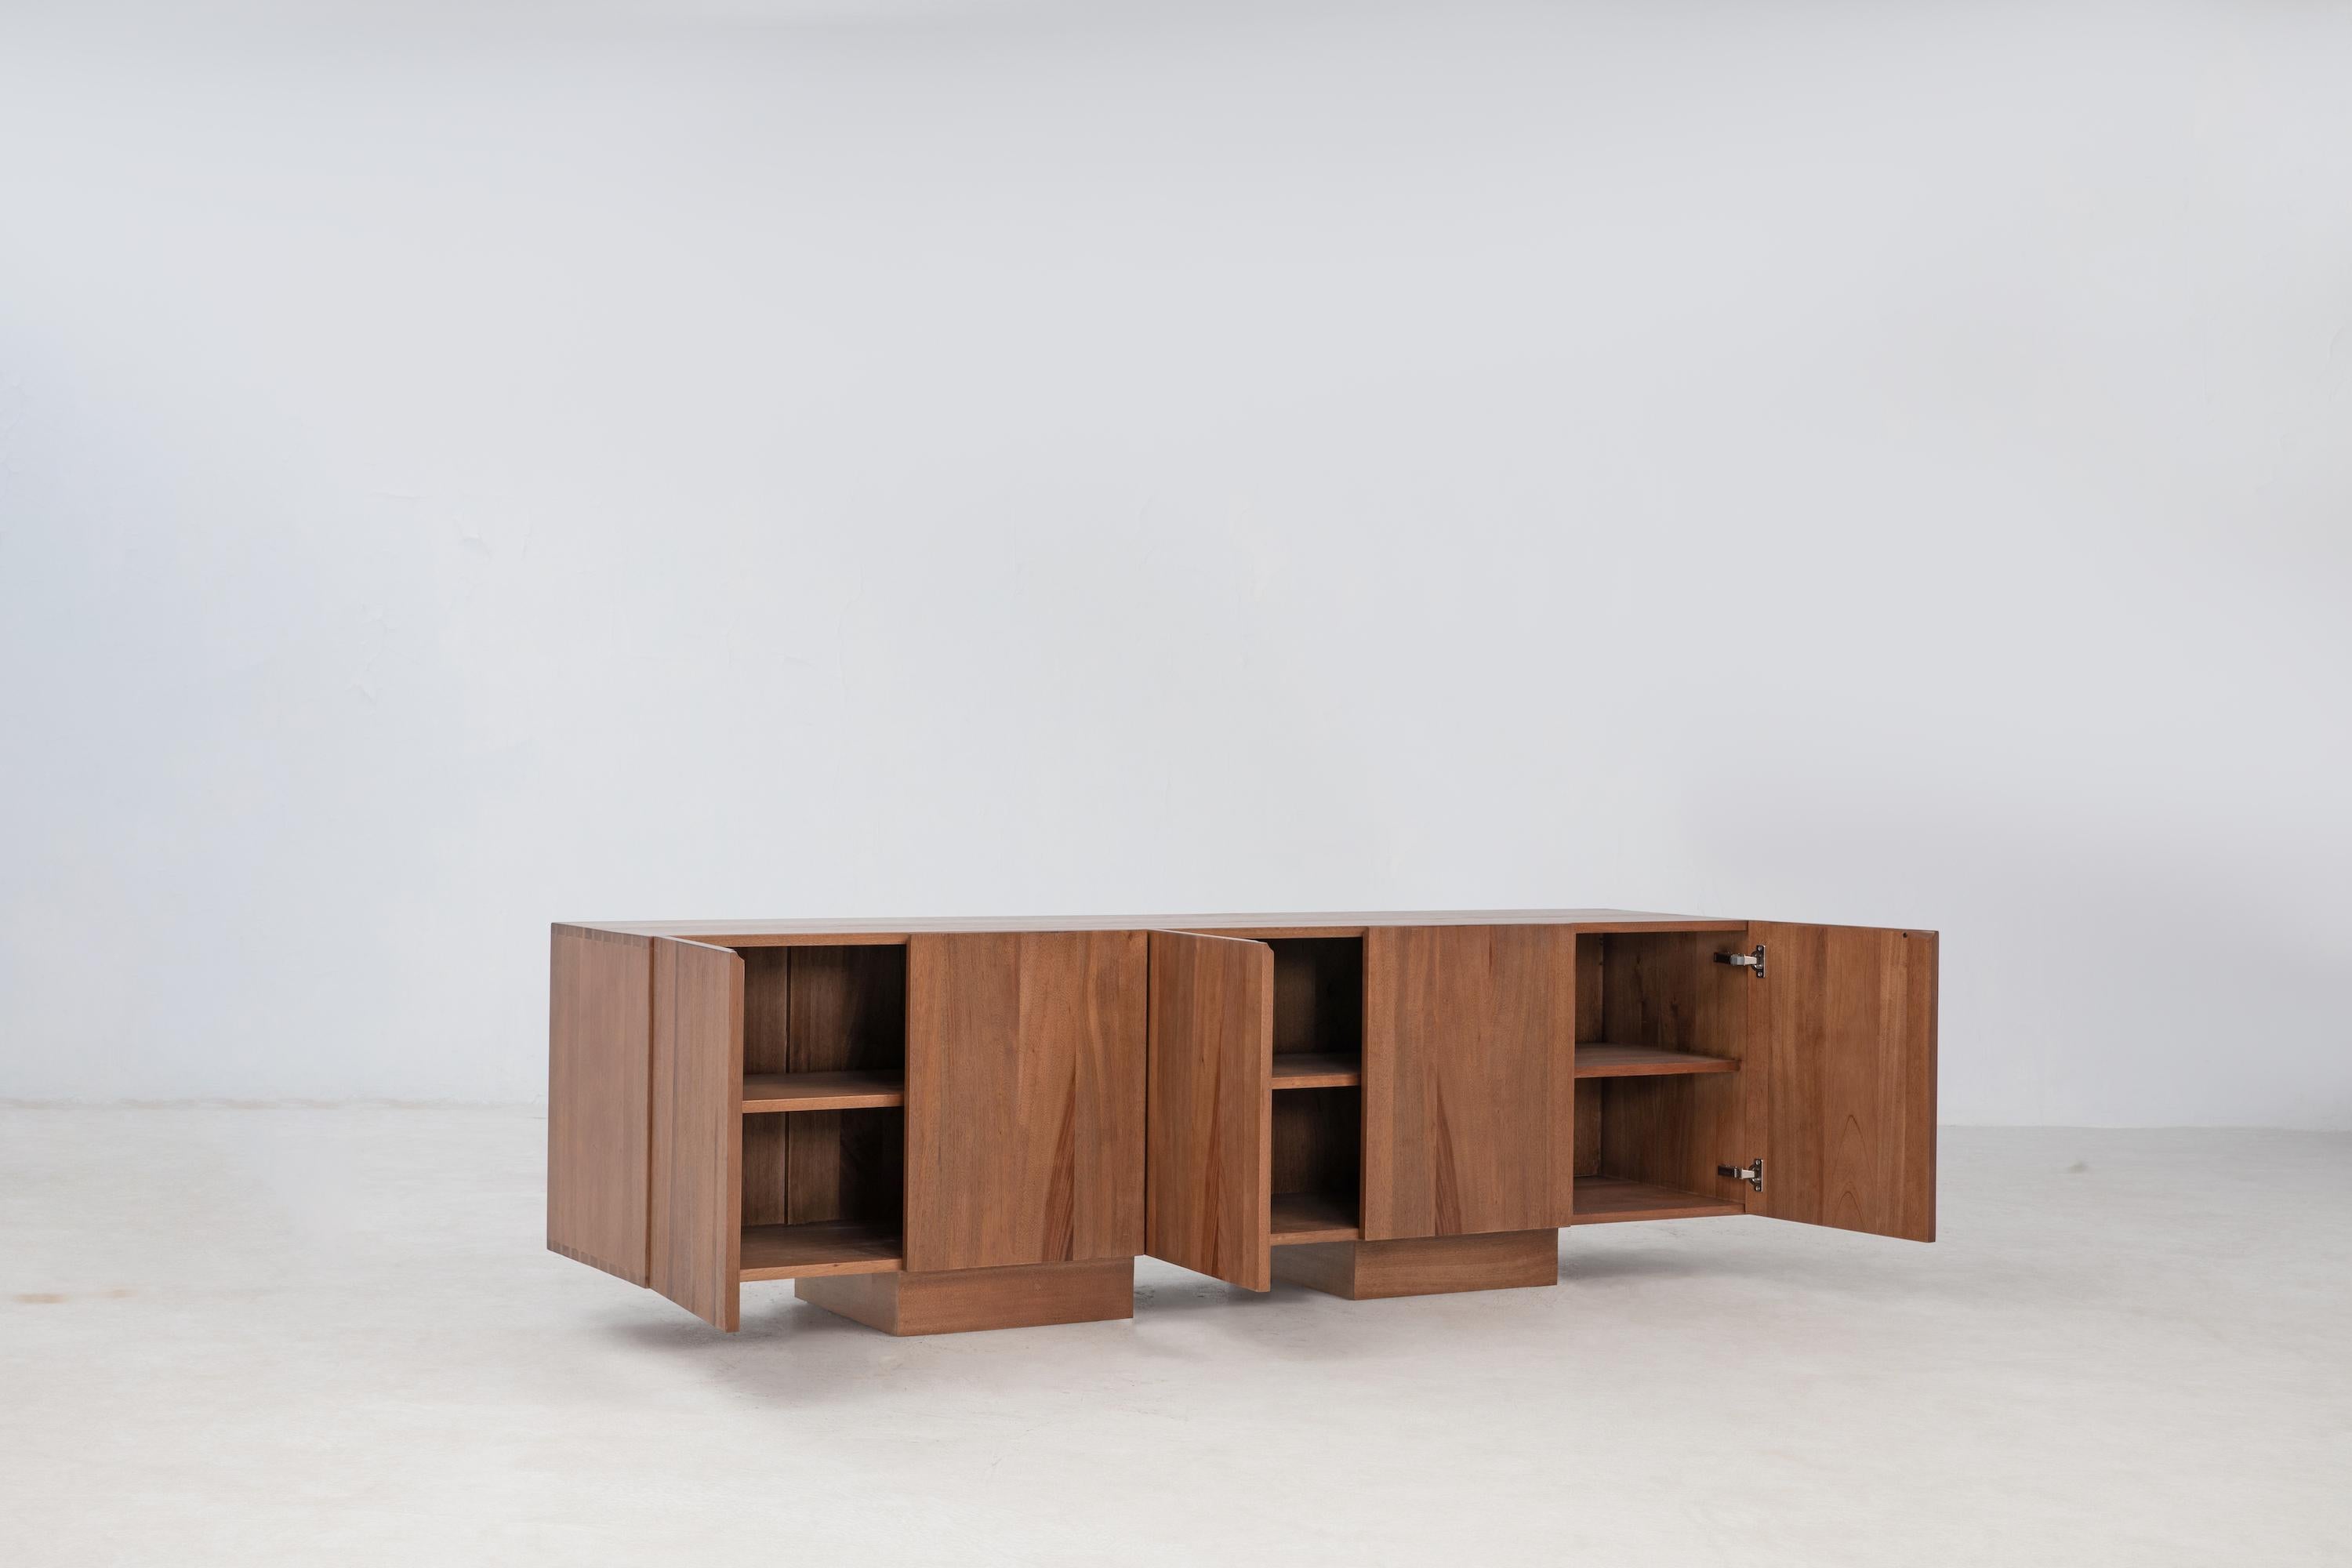 The Wolo Media Cabinet focuses on the beautiful grain and natural characteristics of Makata Wood, with solid front panels that emphasize the beautiful contrasting grains, color, and natural characteristics, along with a luminescent sheen that